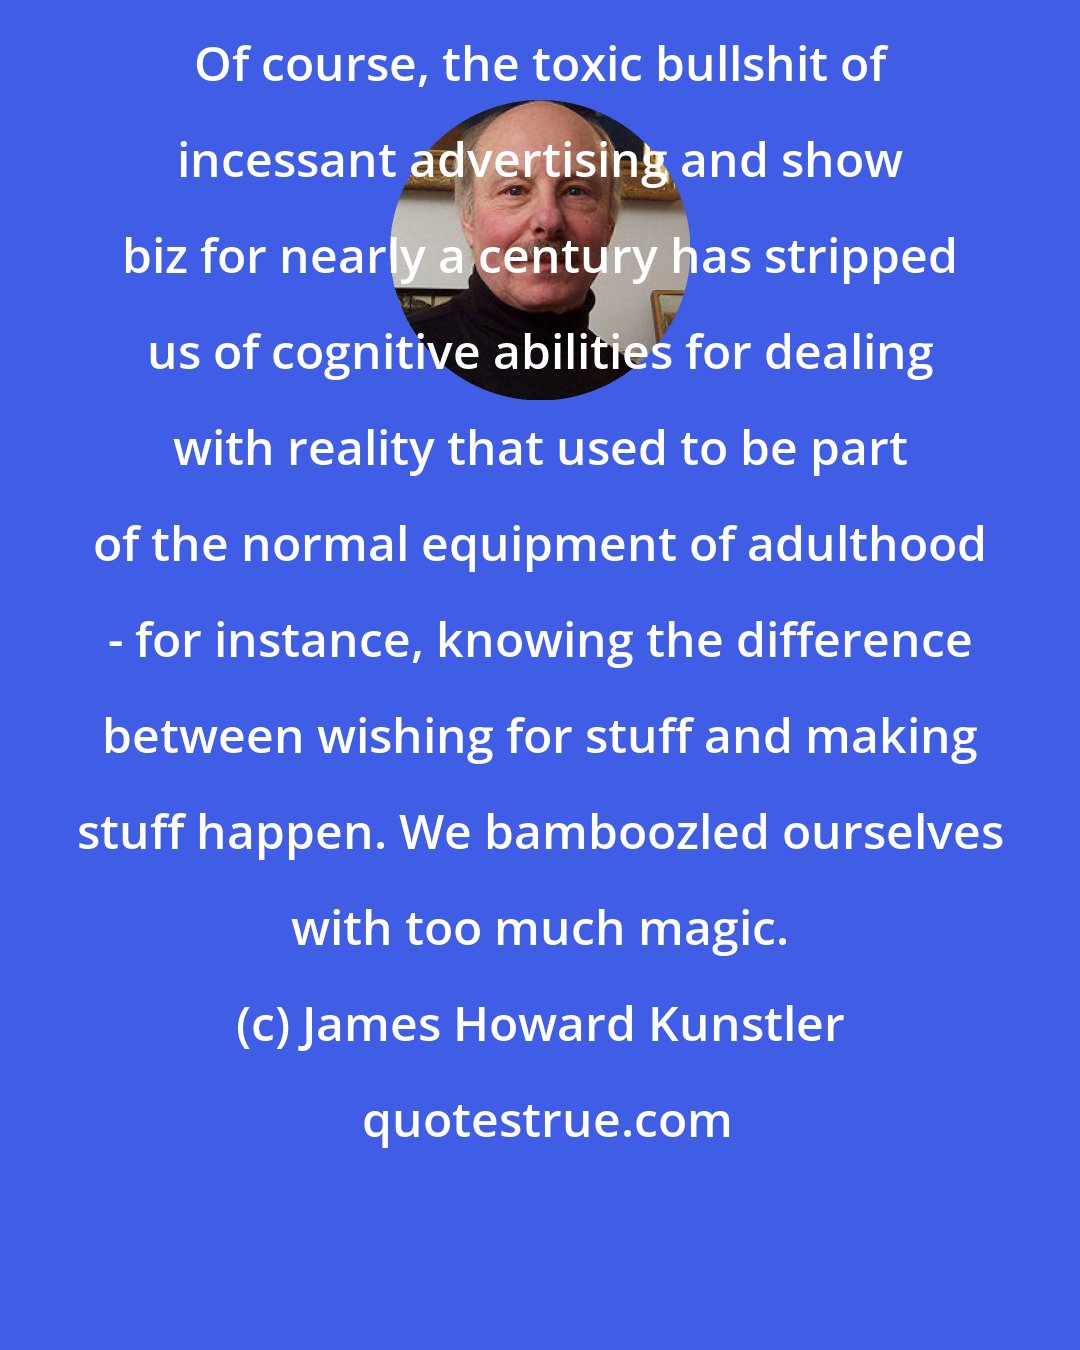 James Howard Kunstler: Of course, the toxic bullshit of incessant advertising and show biz for nearly a century has stripped us of cognitive abilities for dealing with reality that used to be part of the normal equipment of adulthood - for instance, knowing the difference between wishing for stuff and making stuff happen. We bamboozled ourselves with too much magic.